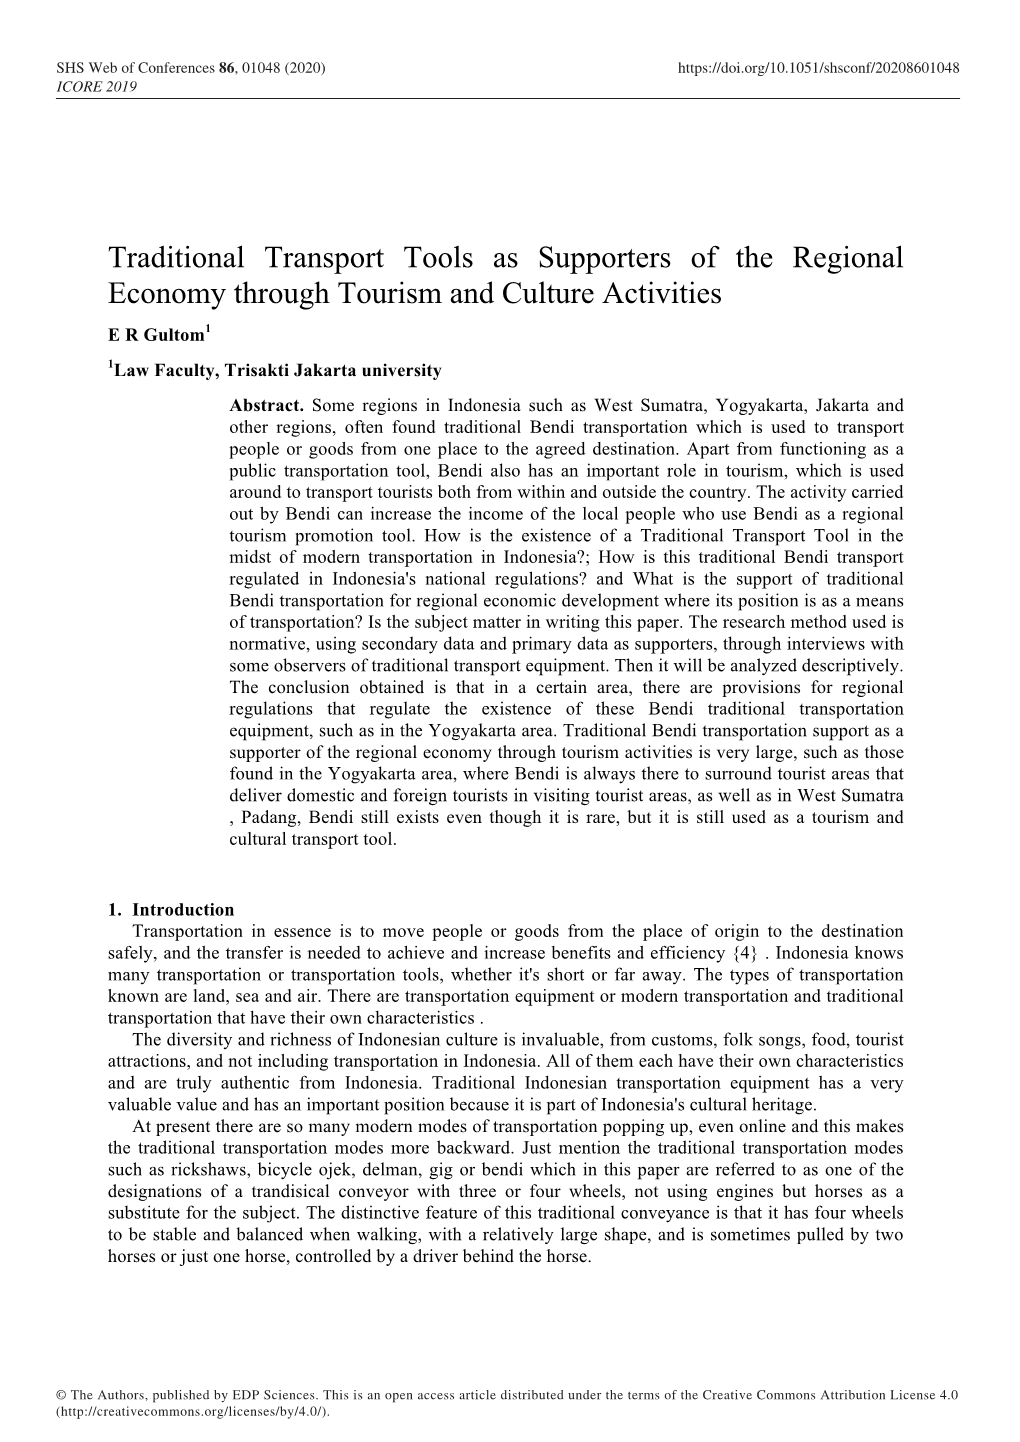 Traditional Transport Tools As Supporters of the Regional